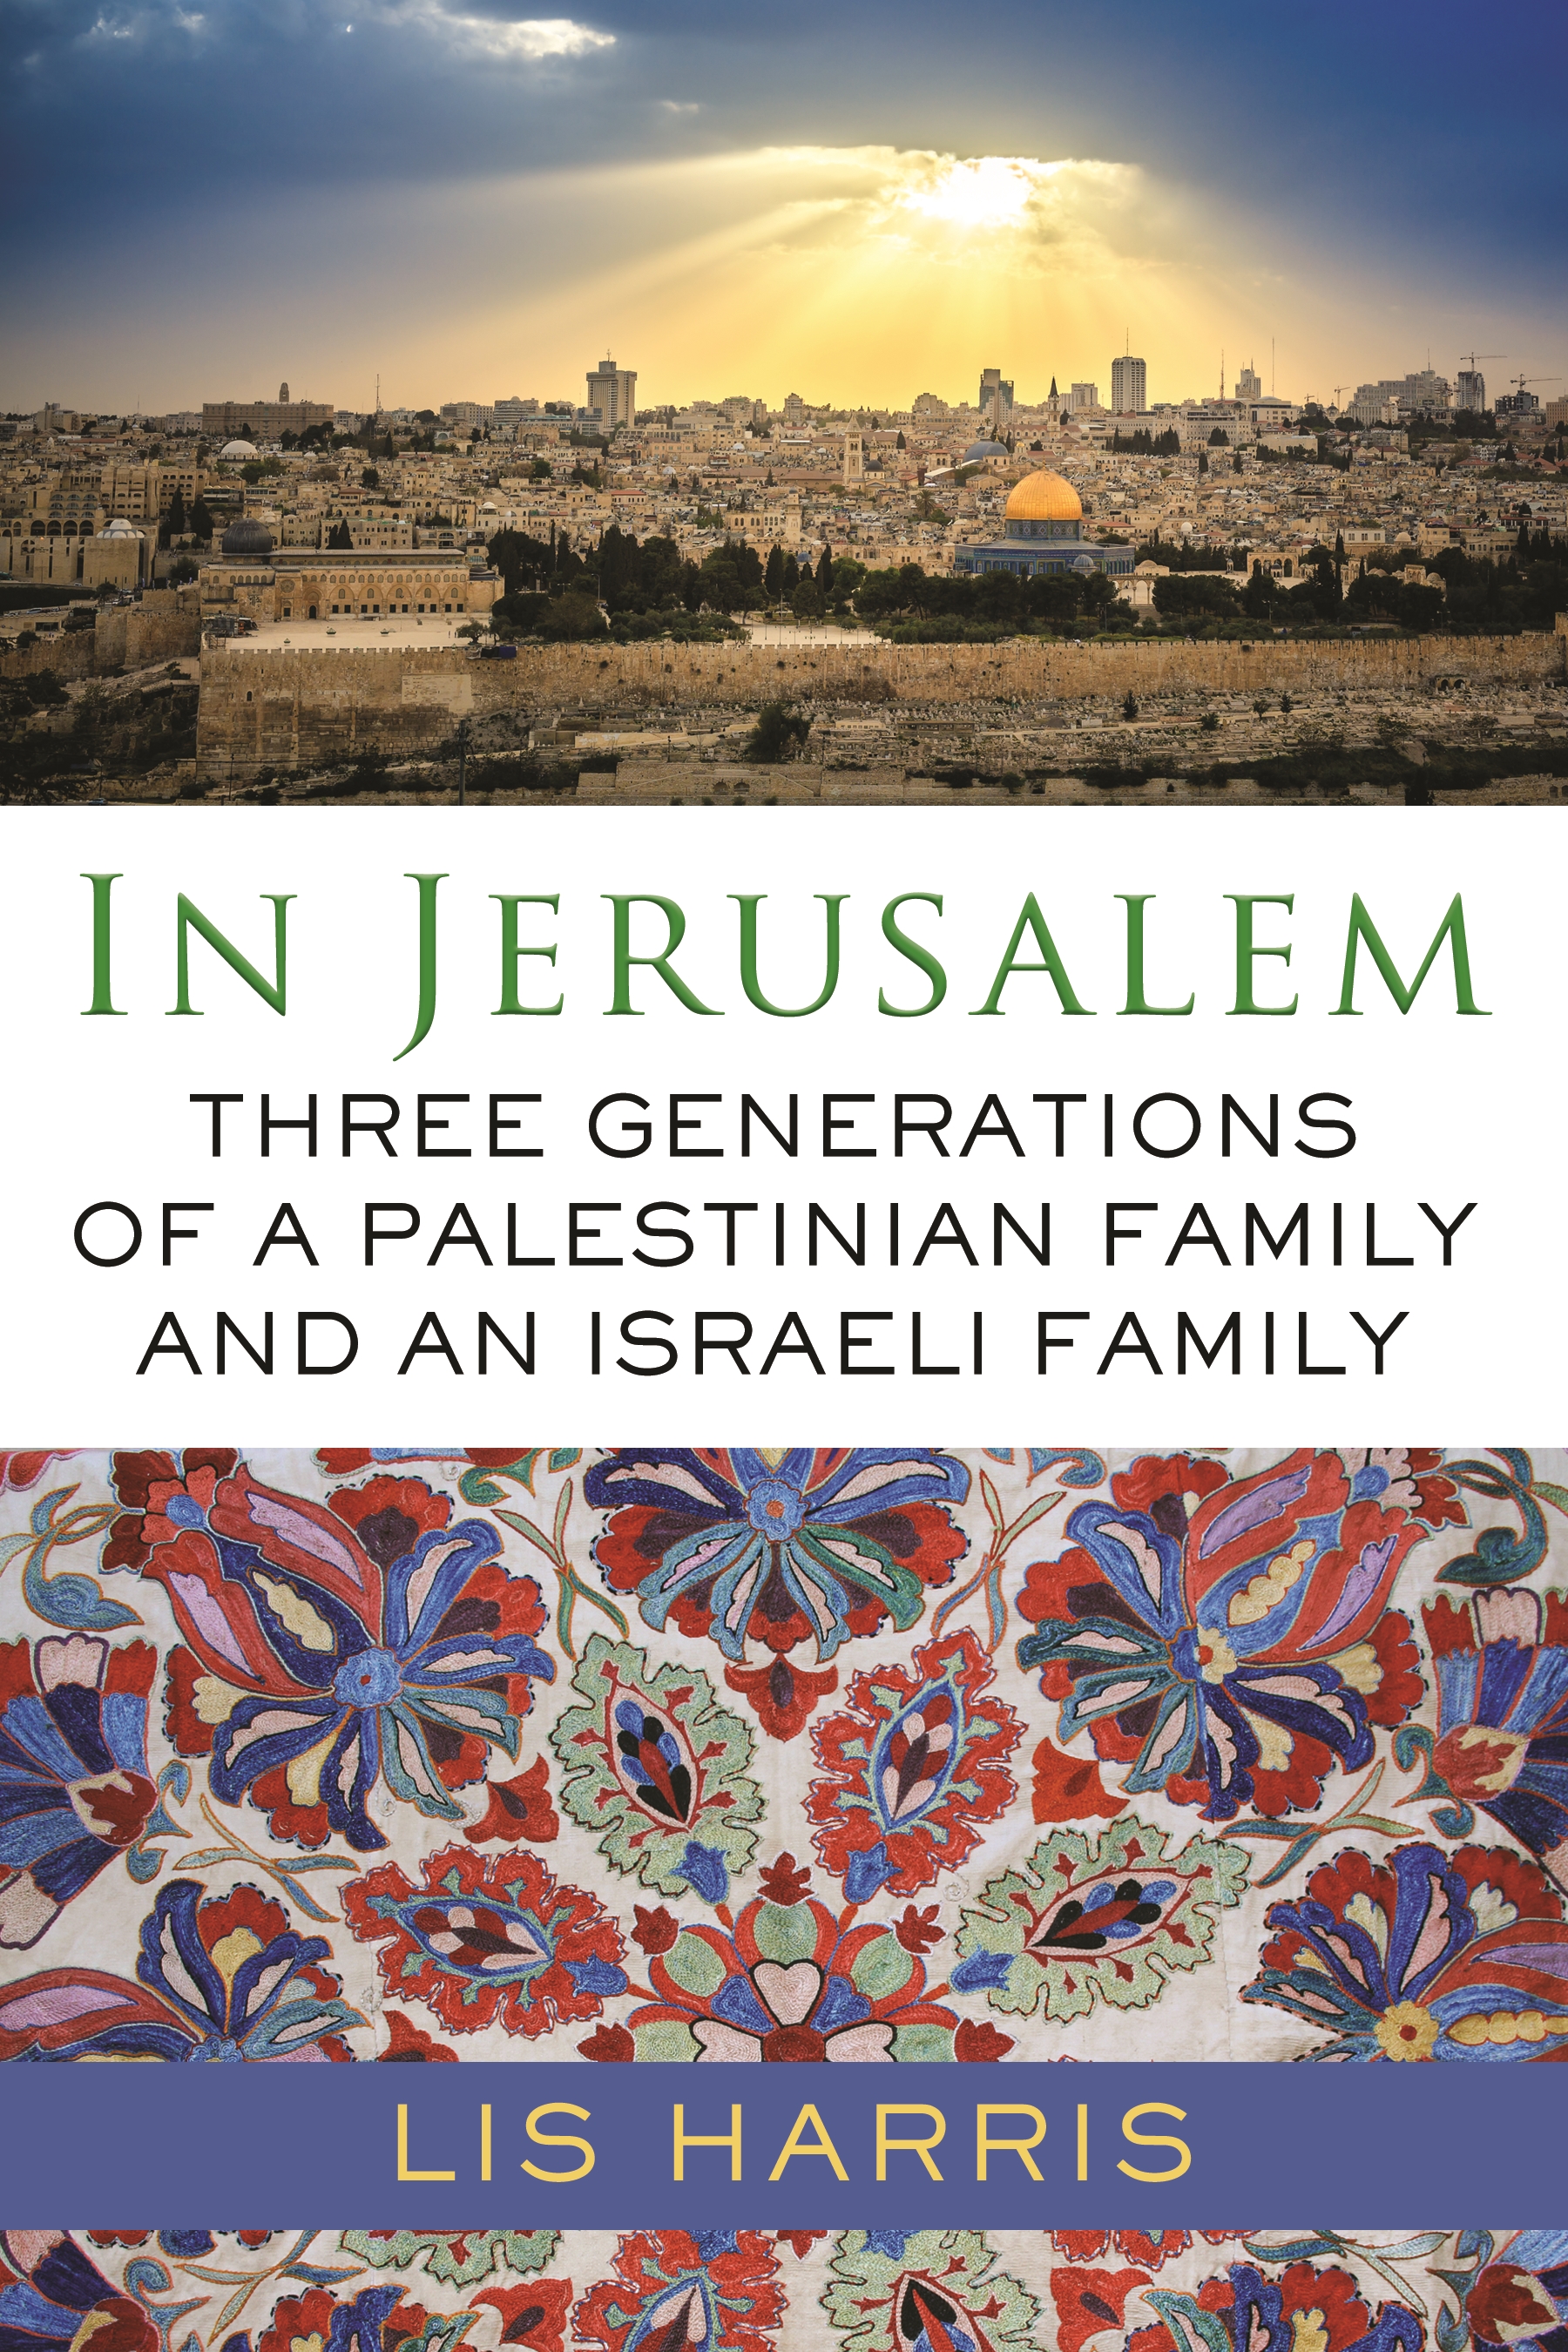 Book Launch: In Jerusalem by Lis Harris in conversation with Adrian Nicole LeBlanc